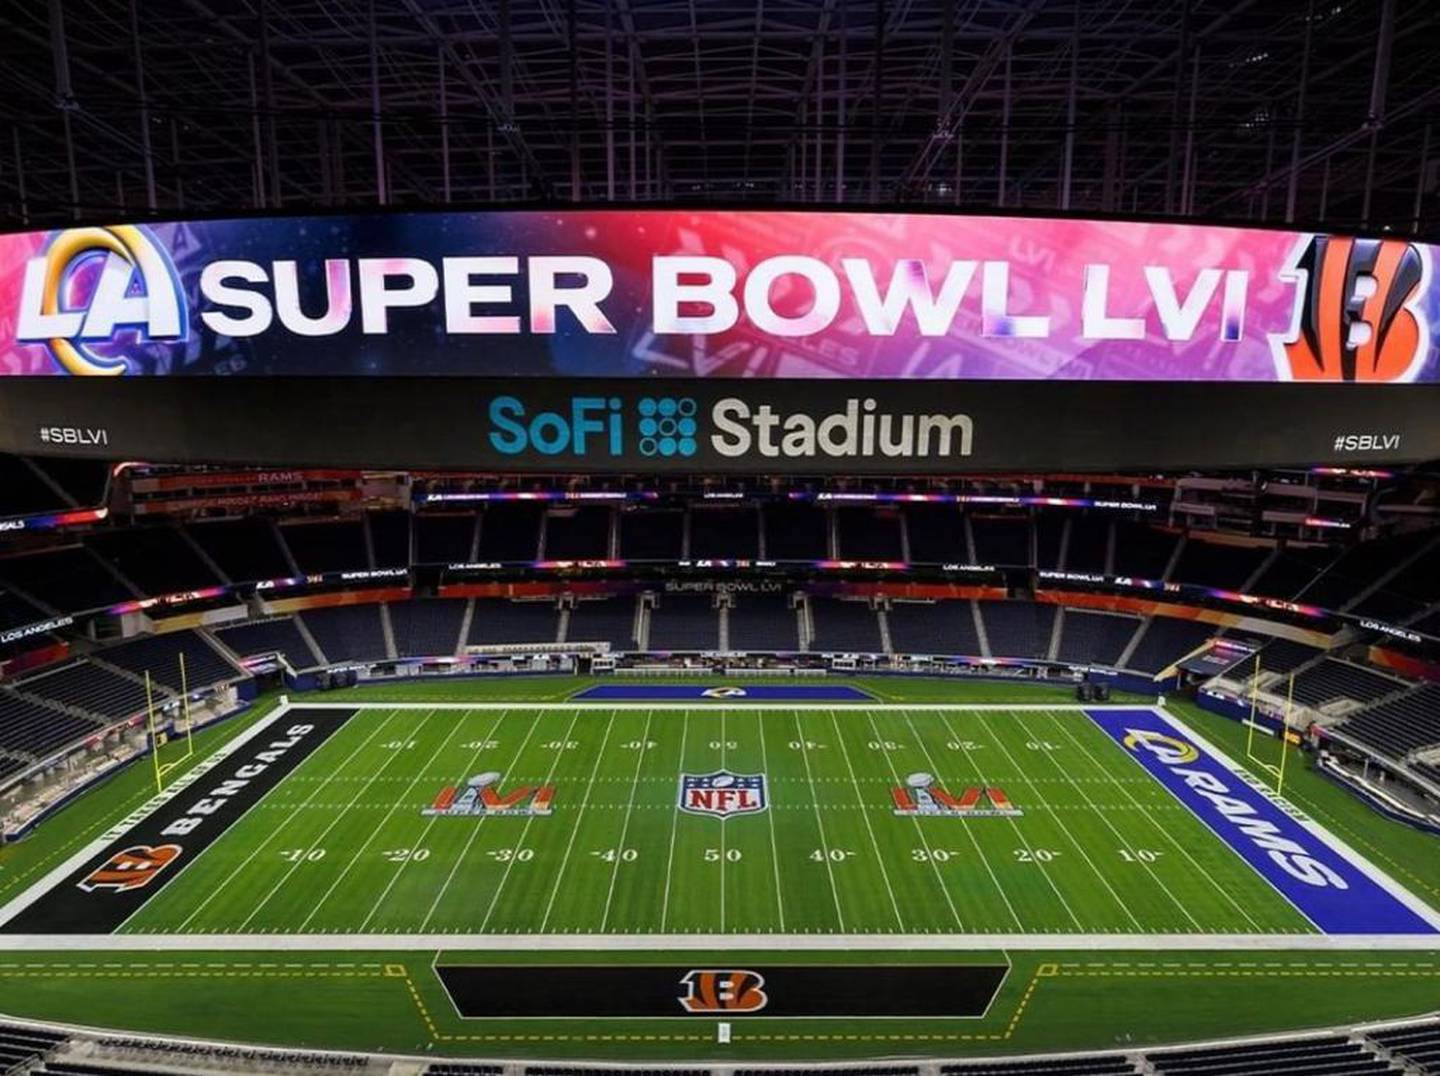 The Super Bowl will return to its roots this Sunday, having first been played in Los Angeles in 1967, although this time the venue is the SoFi Stadium in Inglewood. Photo: Instagram @sofistadium